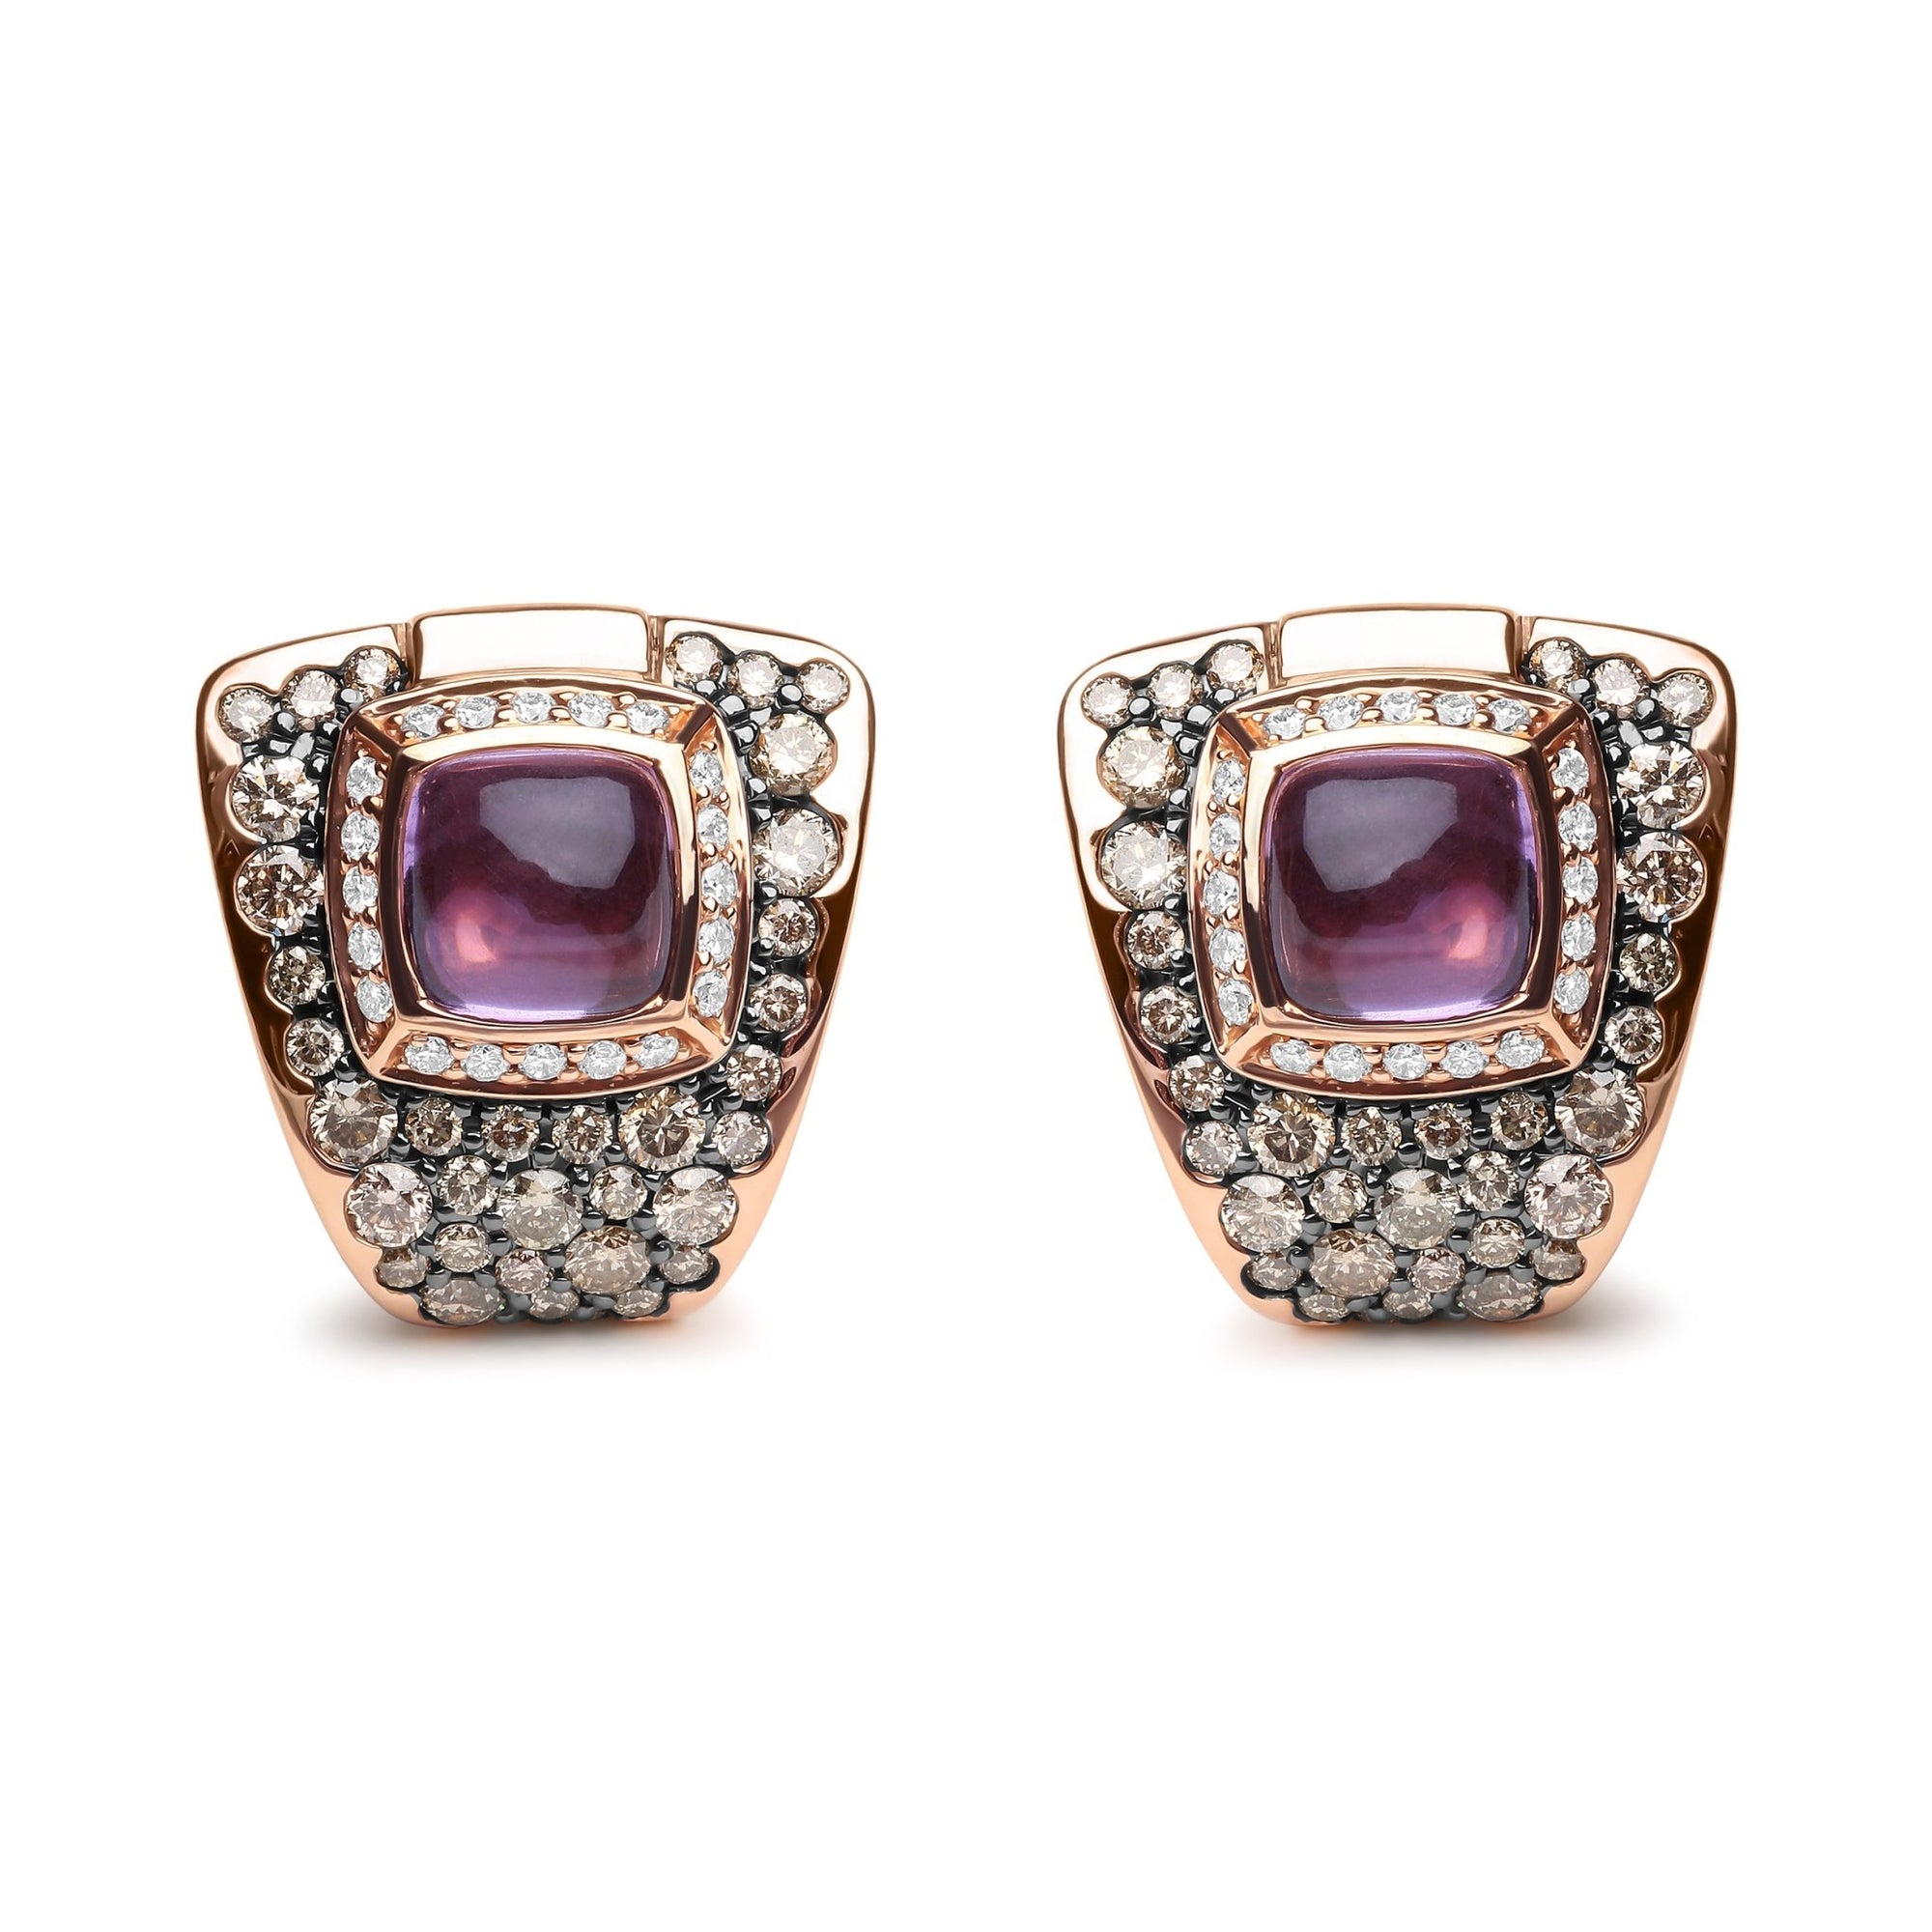 18K Rose Gold 1 1/2 Cttw Round Diamond and 7mm Cushion Cut Purple Amethyst Gemstone Geometrical Statement Stud Earrings (Brown and G-H Color, SI1-SI2 Clarity) - LinkagejewelrydesignLinkagejewelrydesign